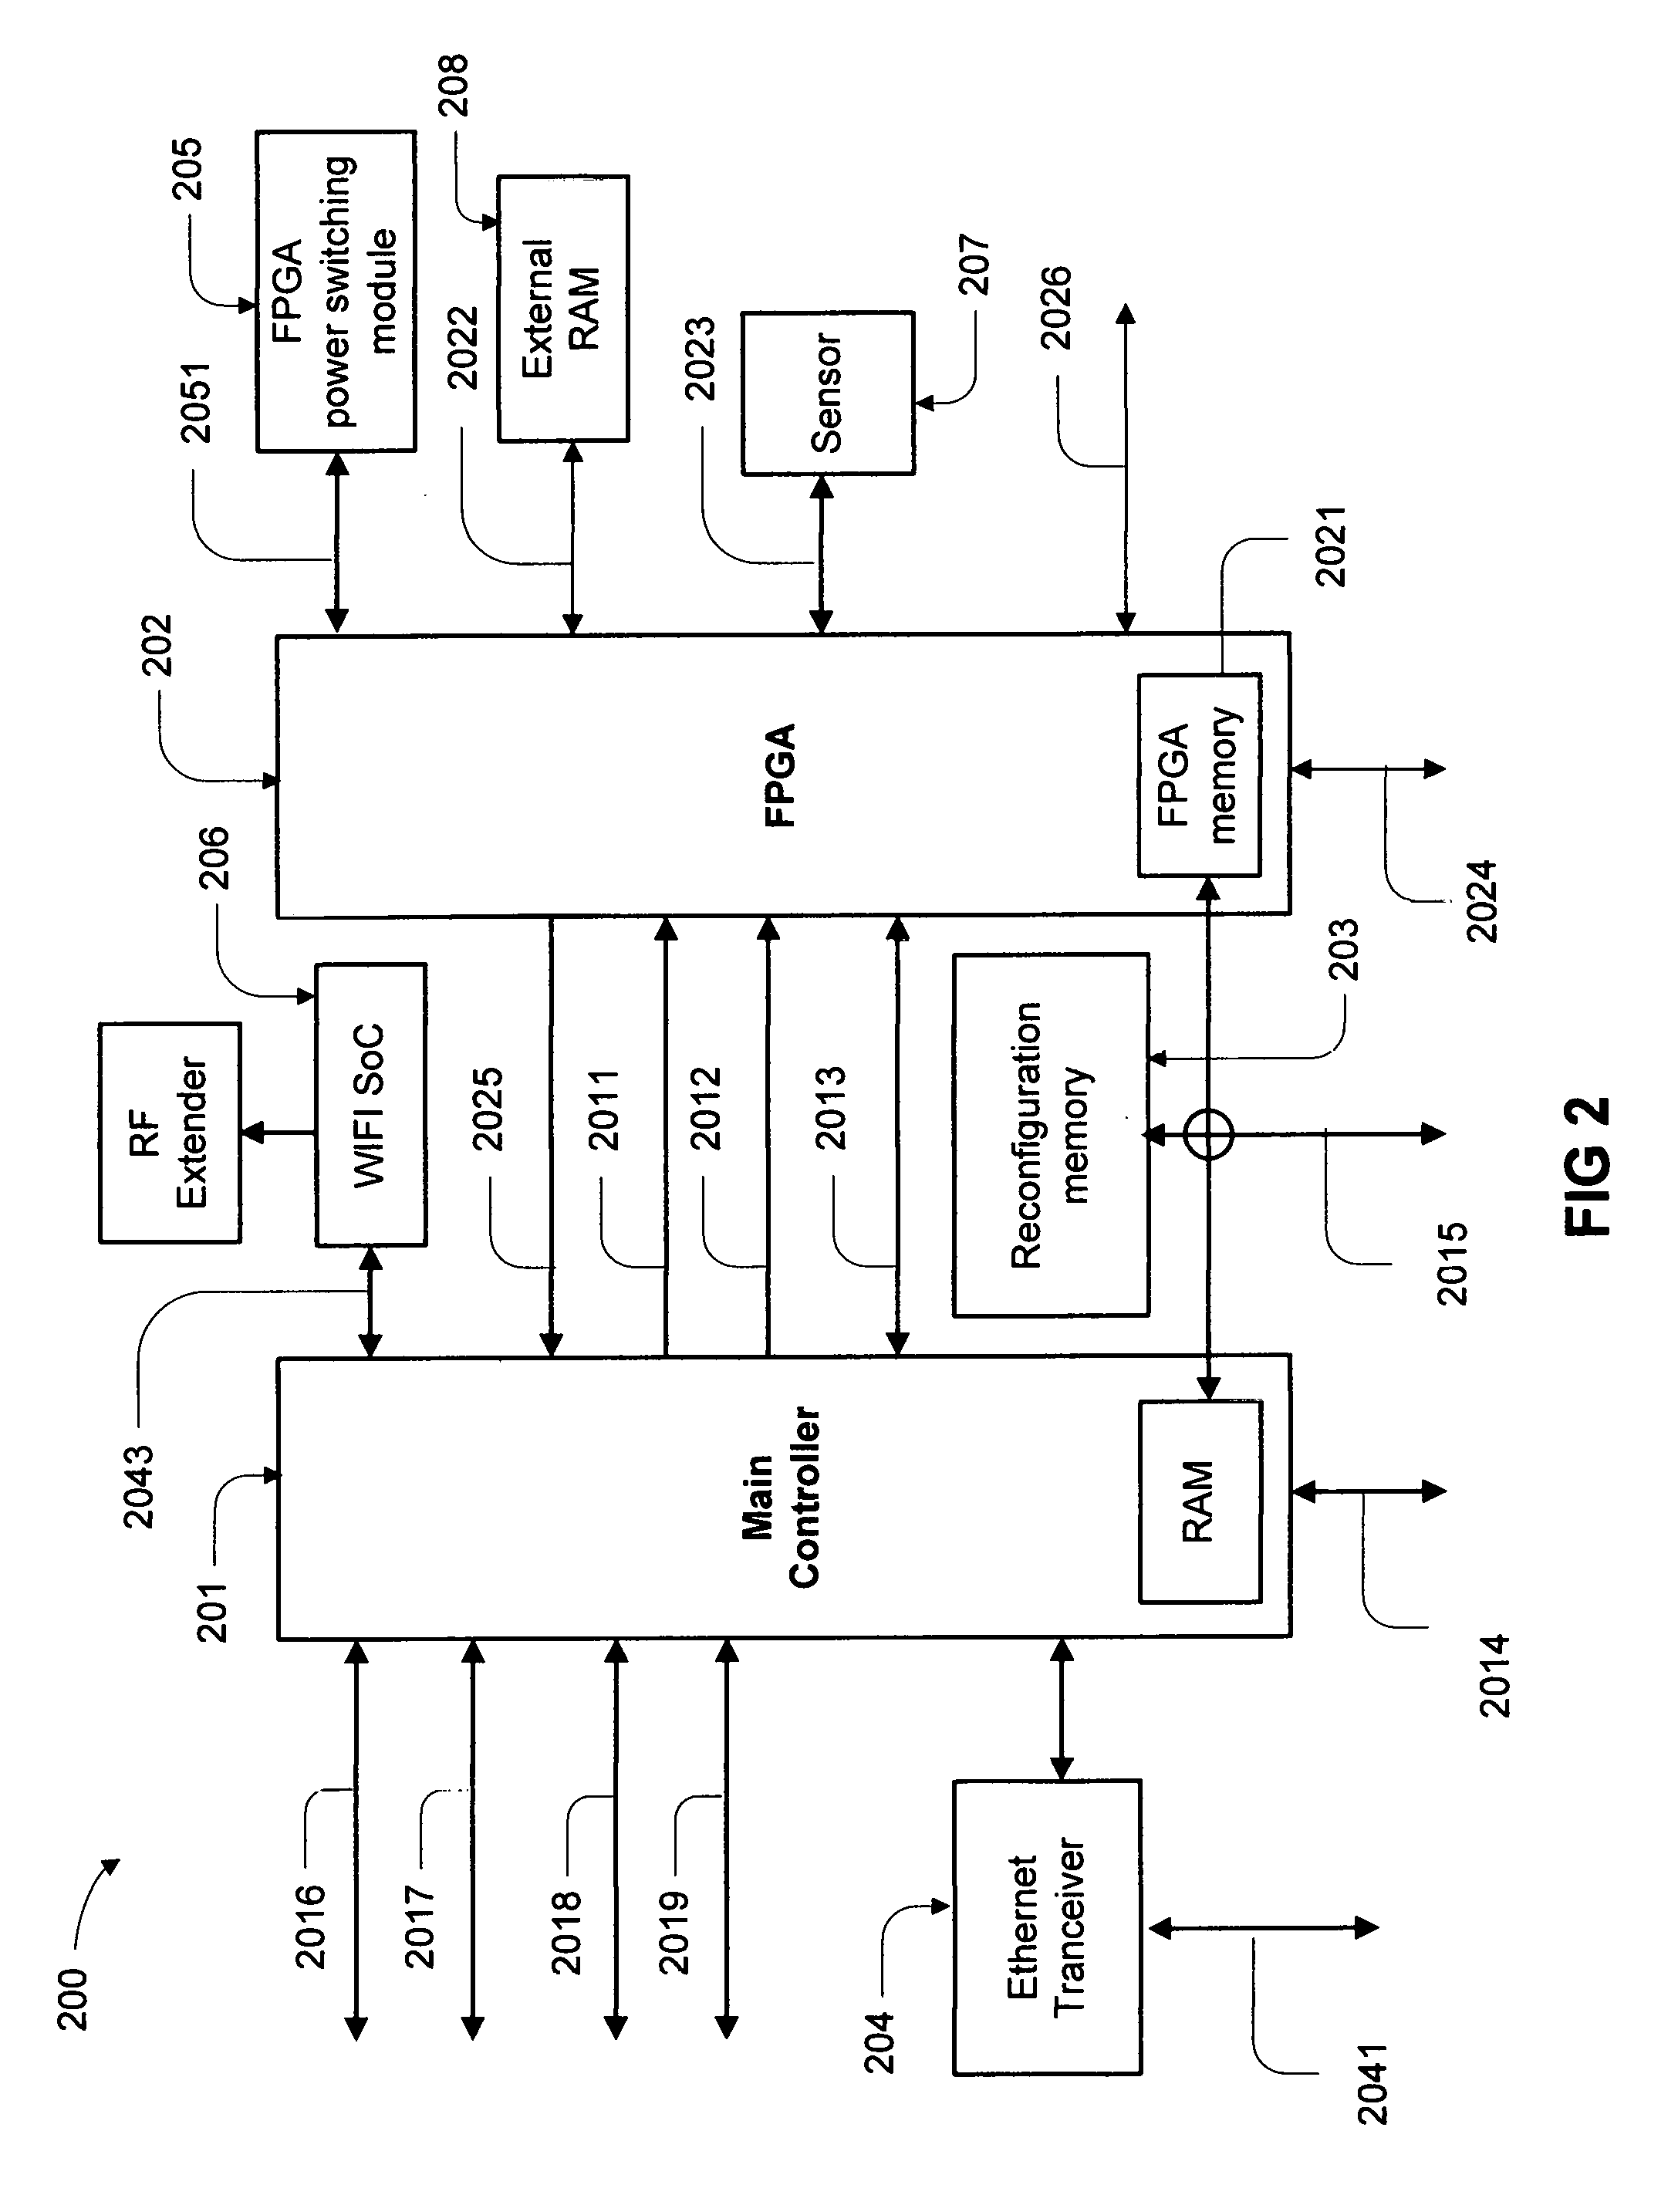 Method and apparatus for neuroplastic internet of things by cloud computing infrastructure as a service incorporating reconfigurable hardware